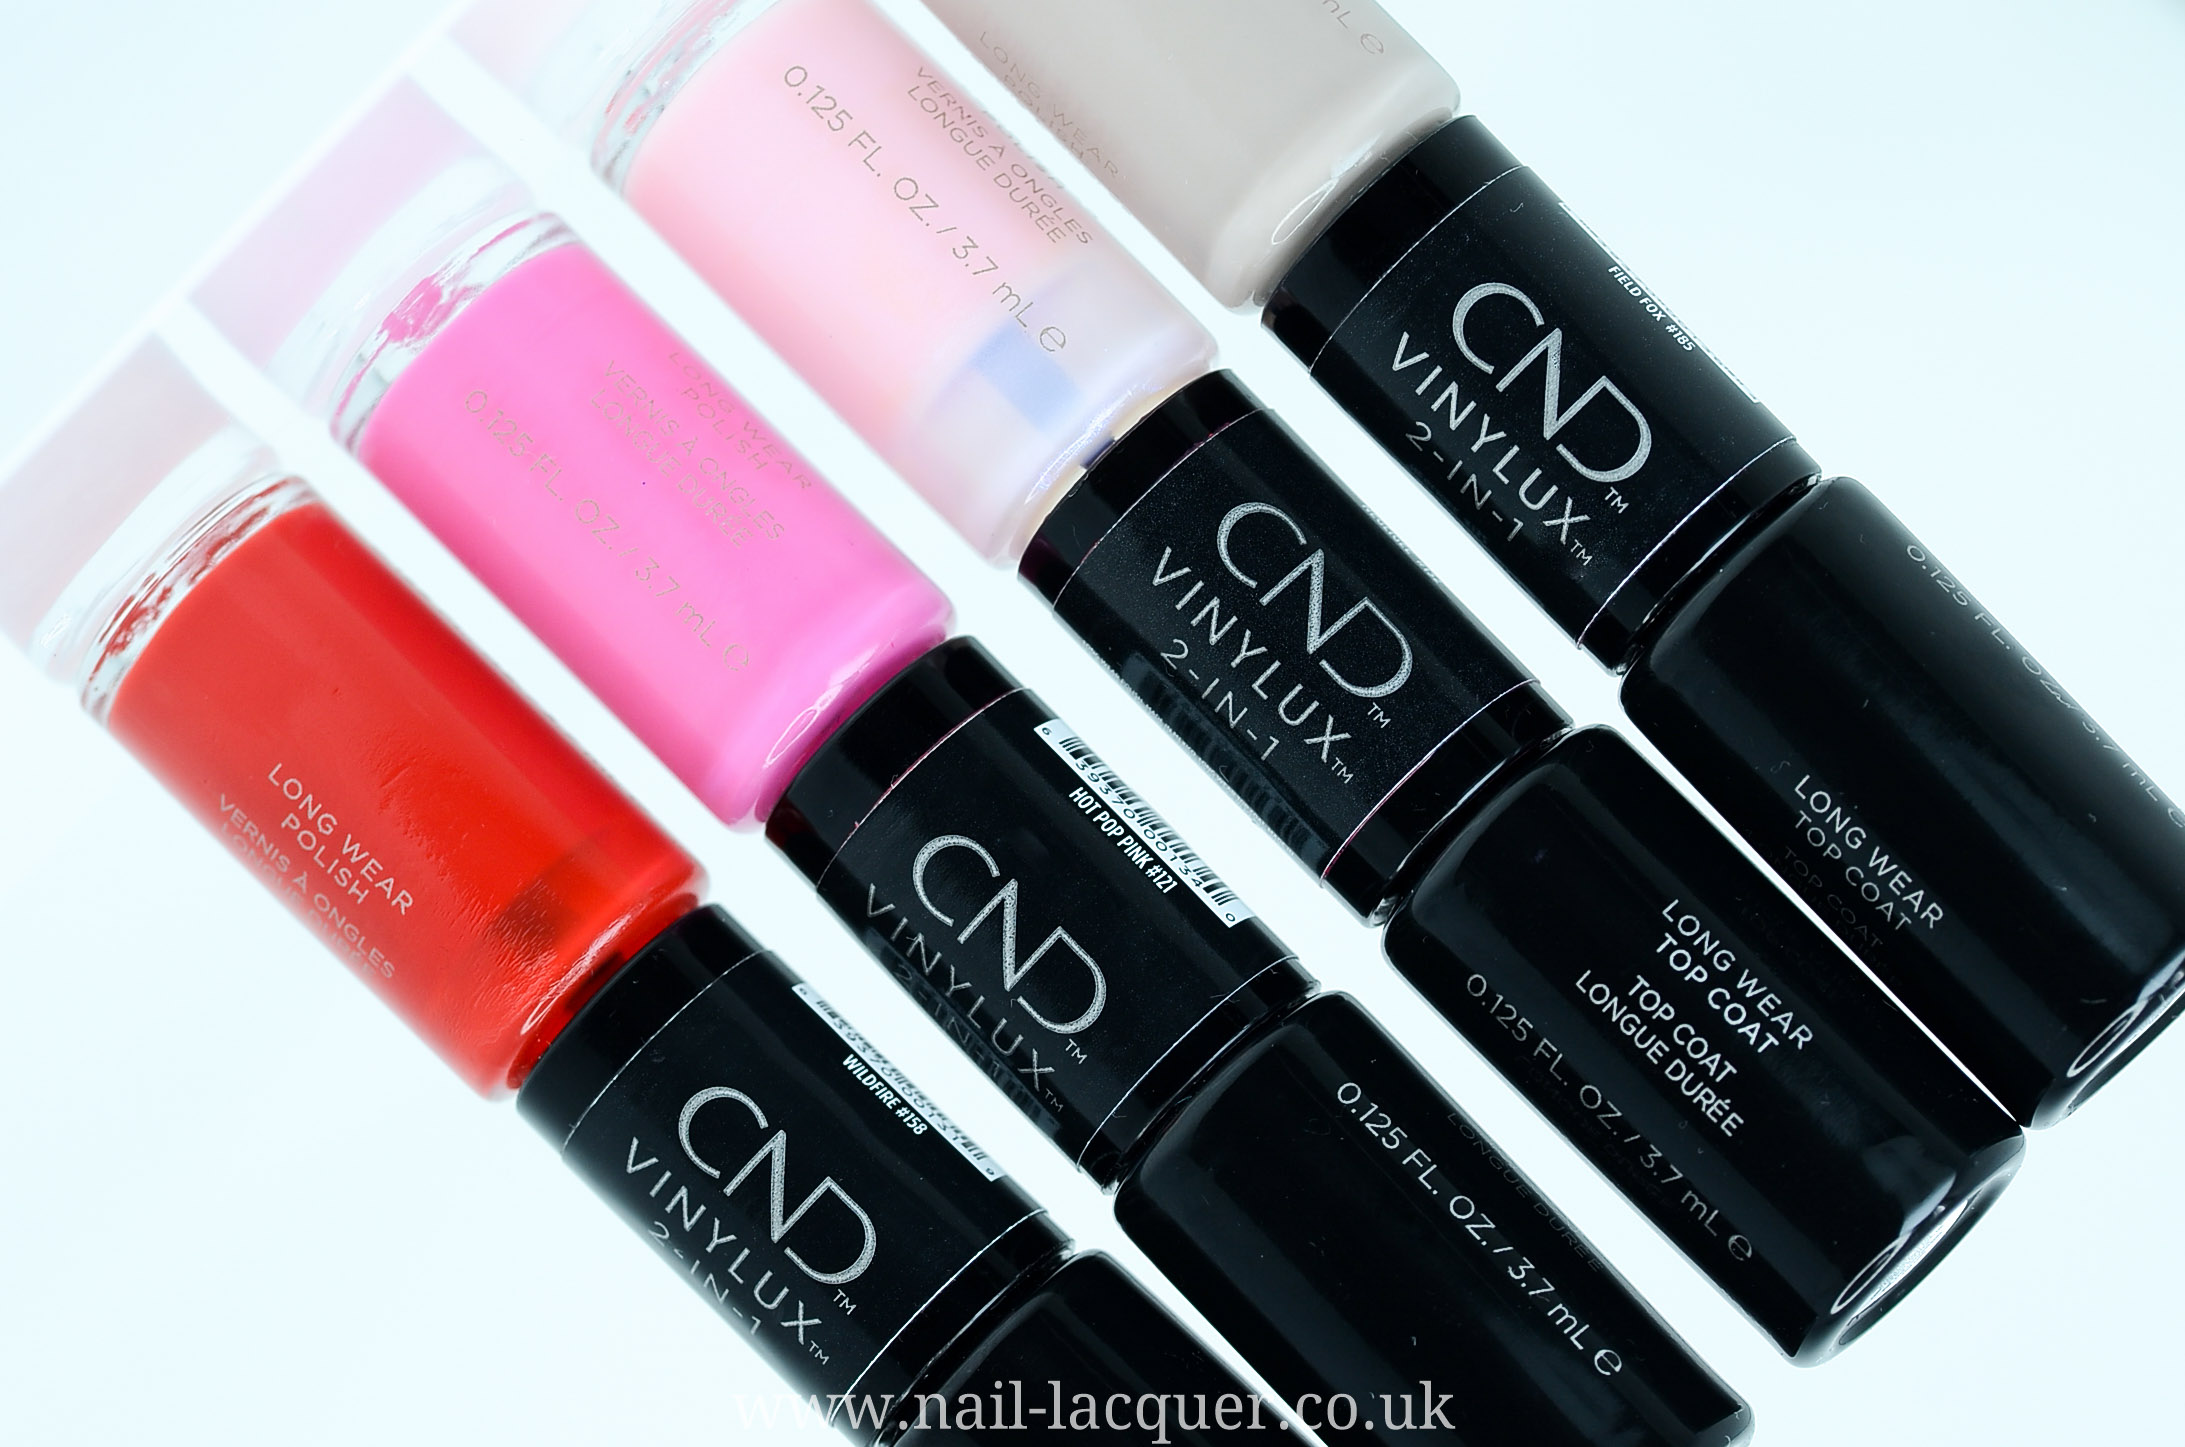 8. CND Vinylux Long Wear Nail Polish, Stuck On You - wide 6